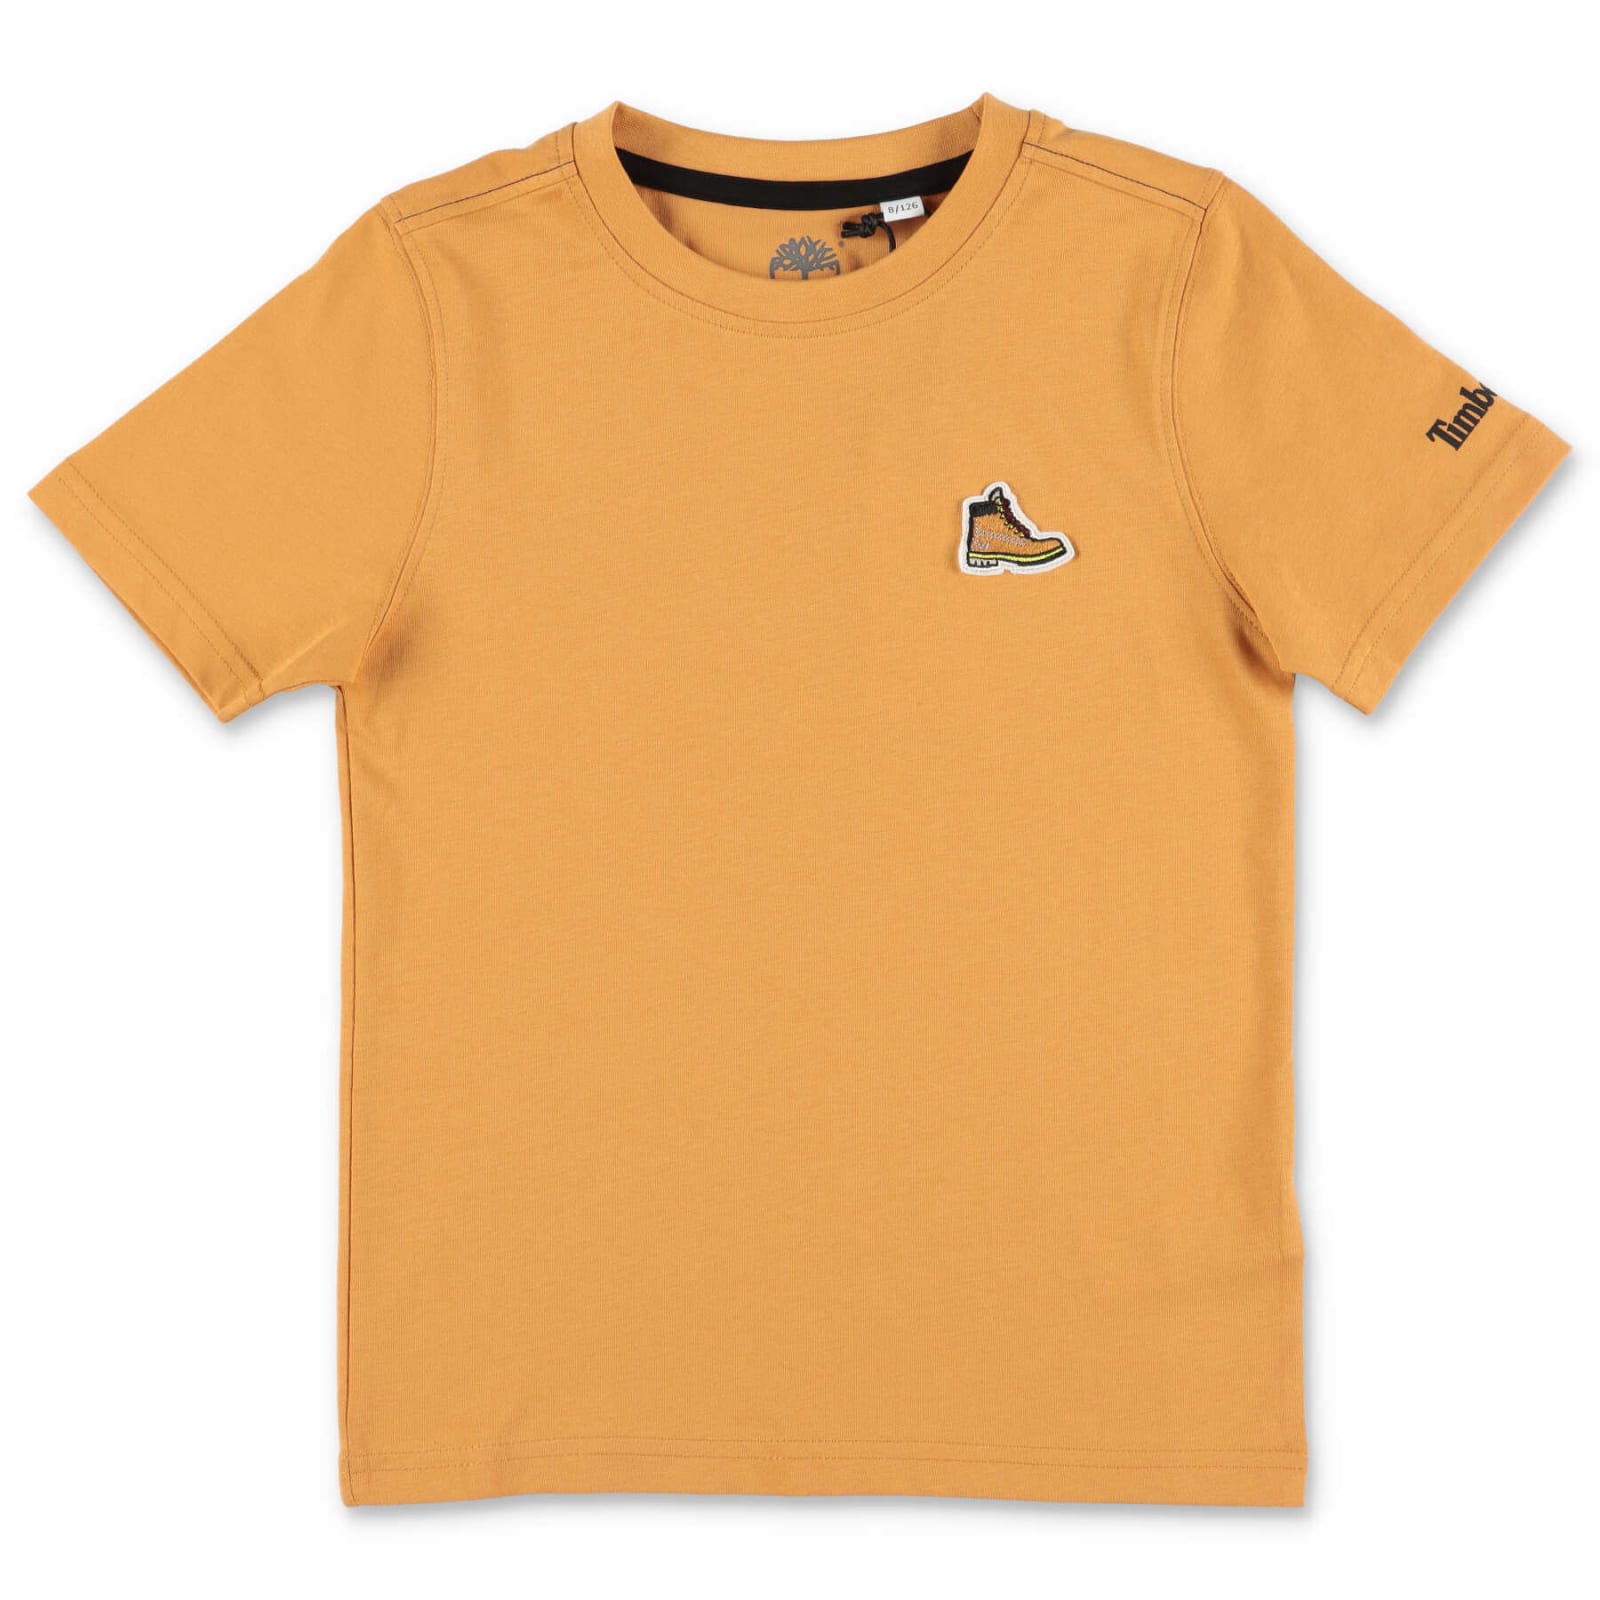 Timberland T-shirt Giallo Ocra In Jersey Di Cotone